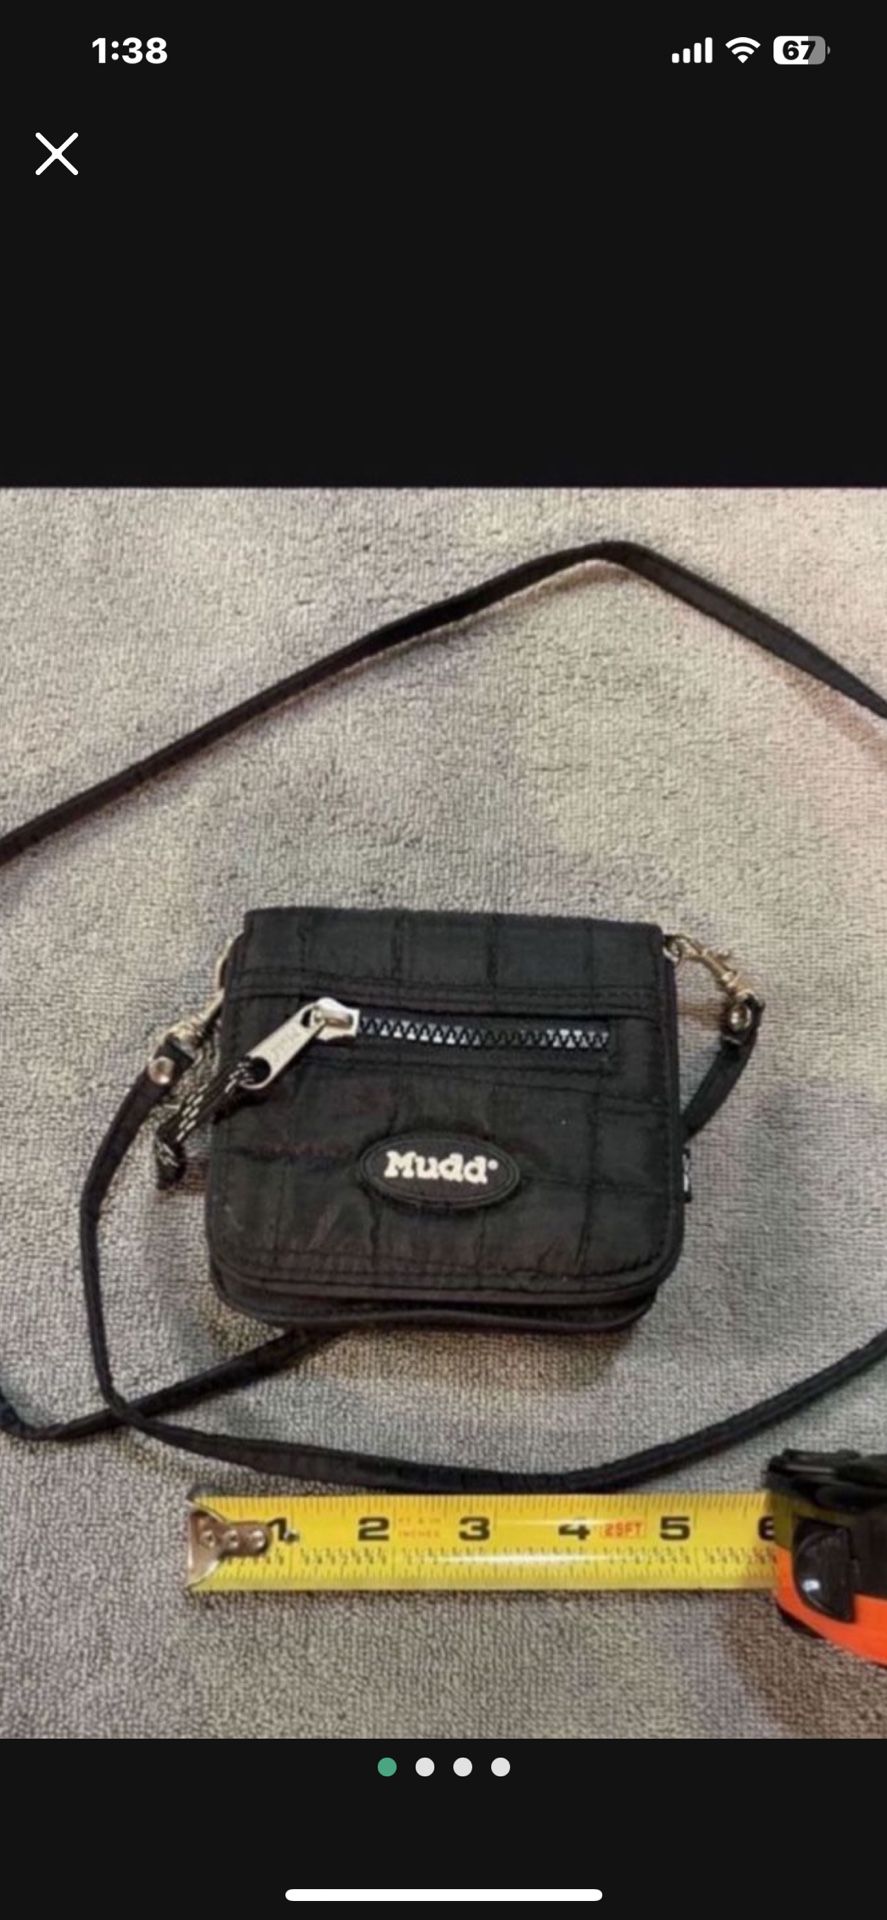 CA. MUDD CROSSBODY. LOTS OF COMPARTMENTS. APPROX. 4.5 X 4.5”